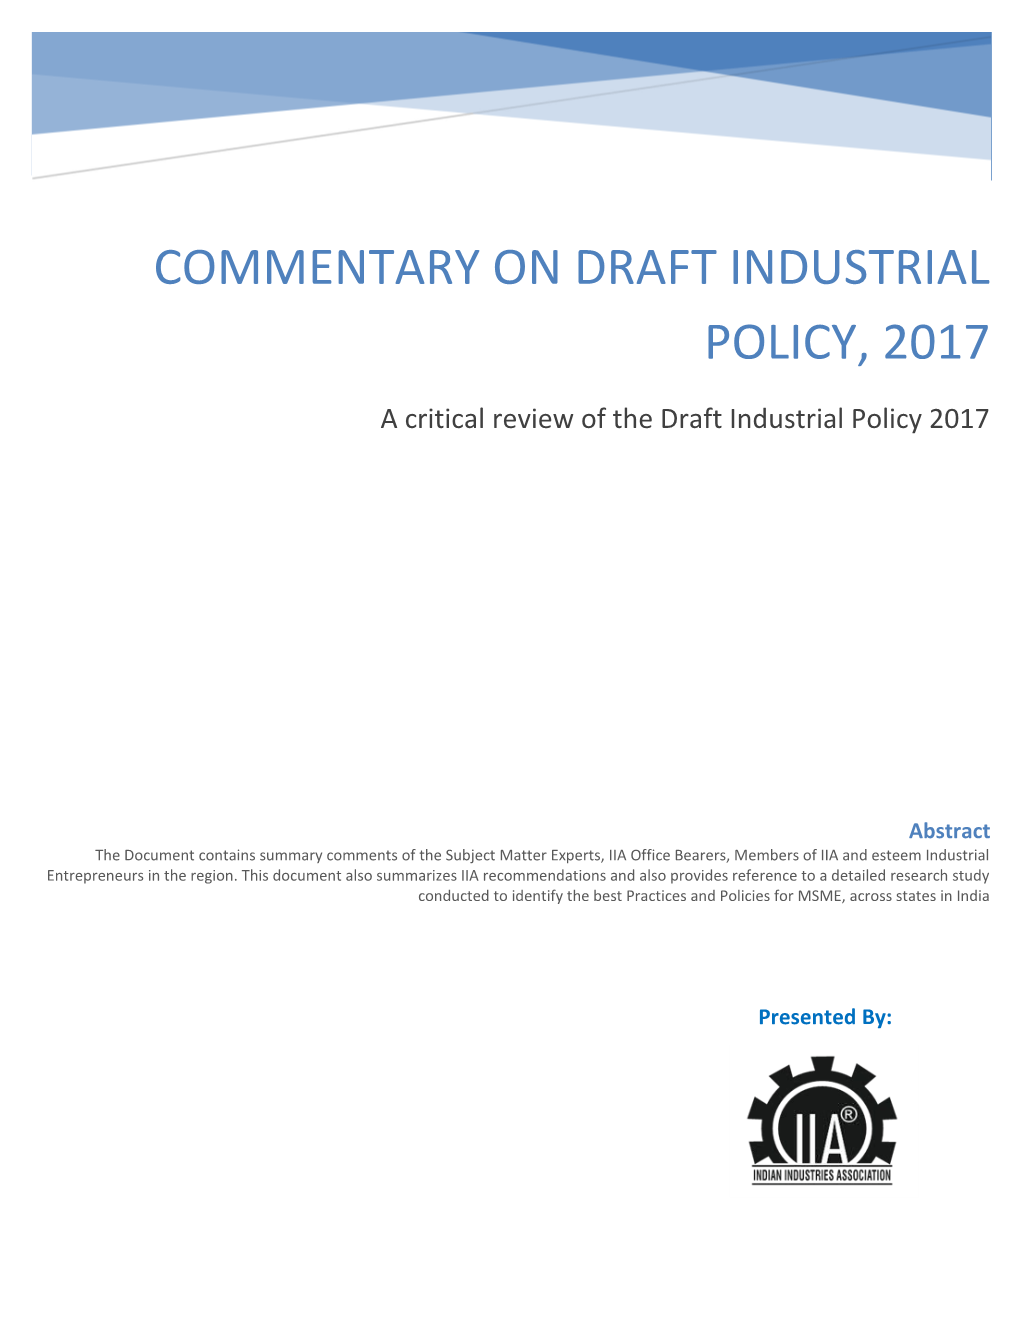 Commentary on Draft Industrial Policy, 2017